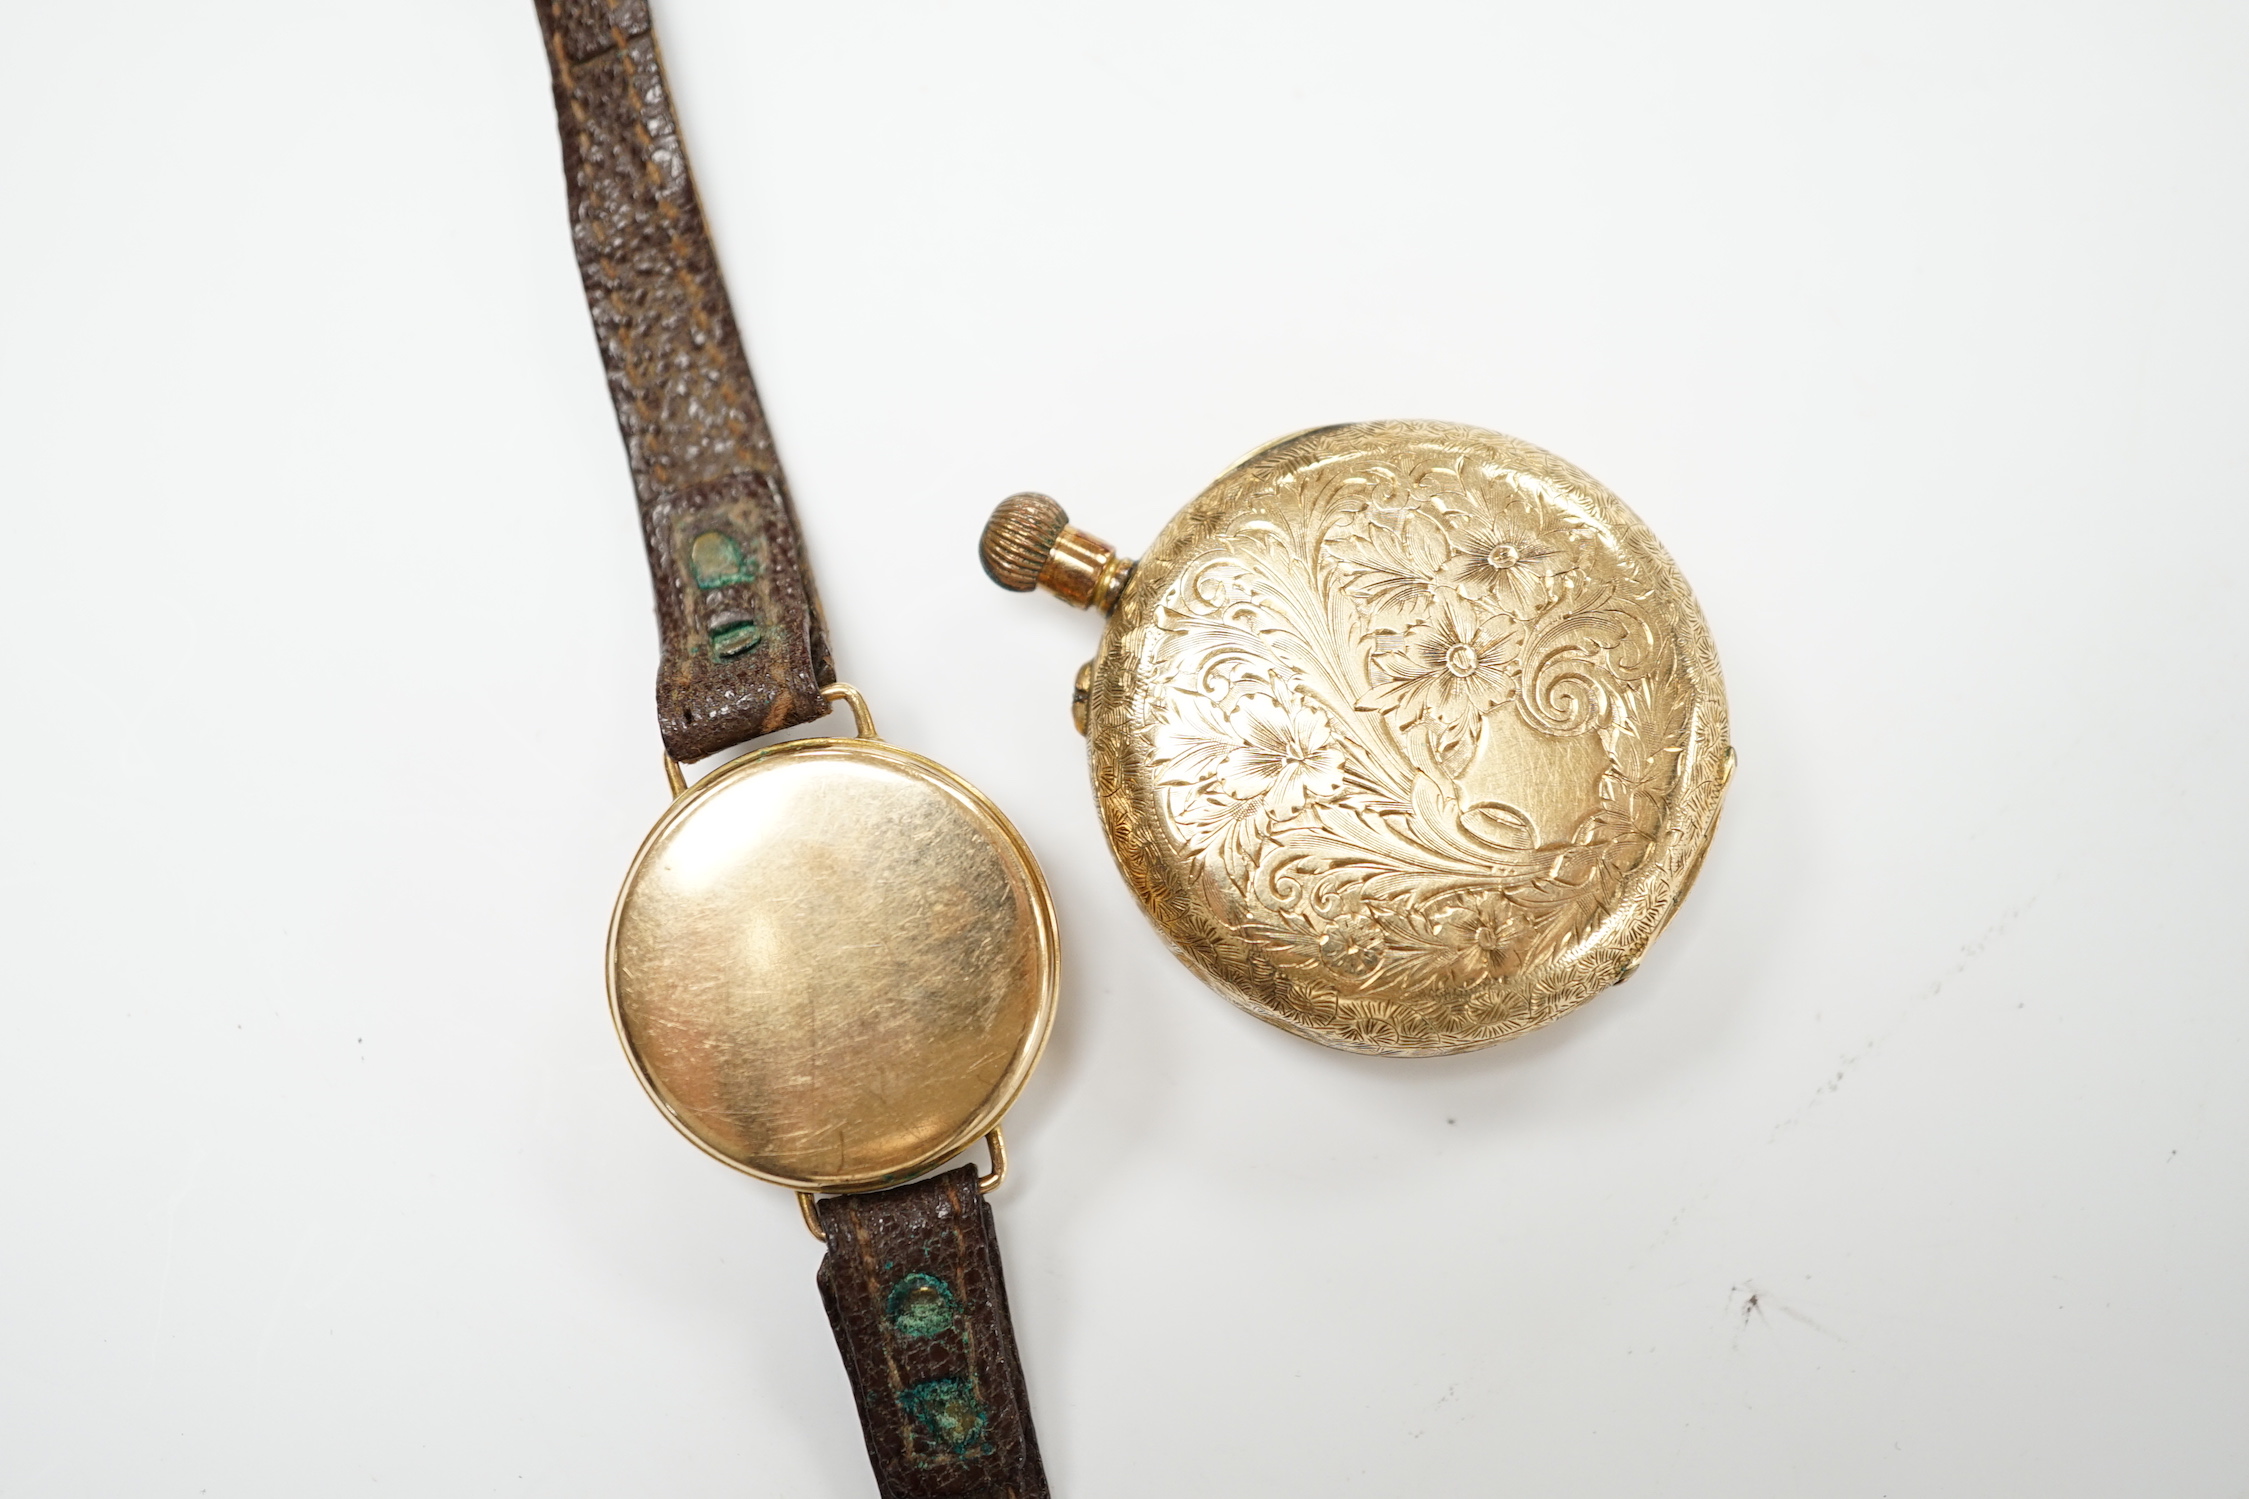 A 14k open faced keyless fob watch, with Roman dial, gross weight 31.7 grams and a lady's 9ct gold manual wind wrist watch (lacking winding crown), on a leather strap.                                                     